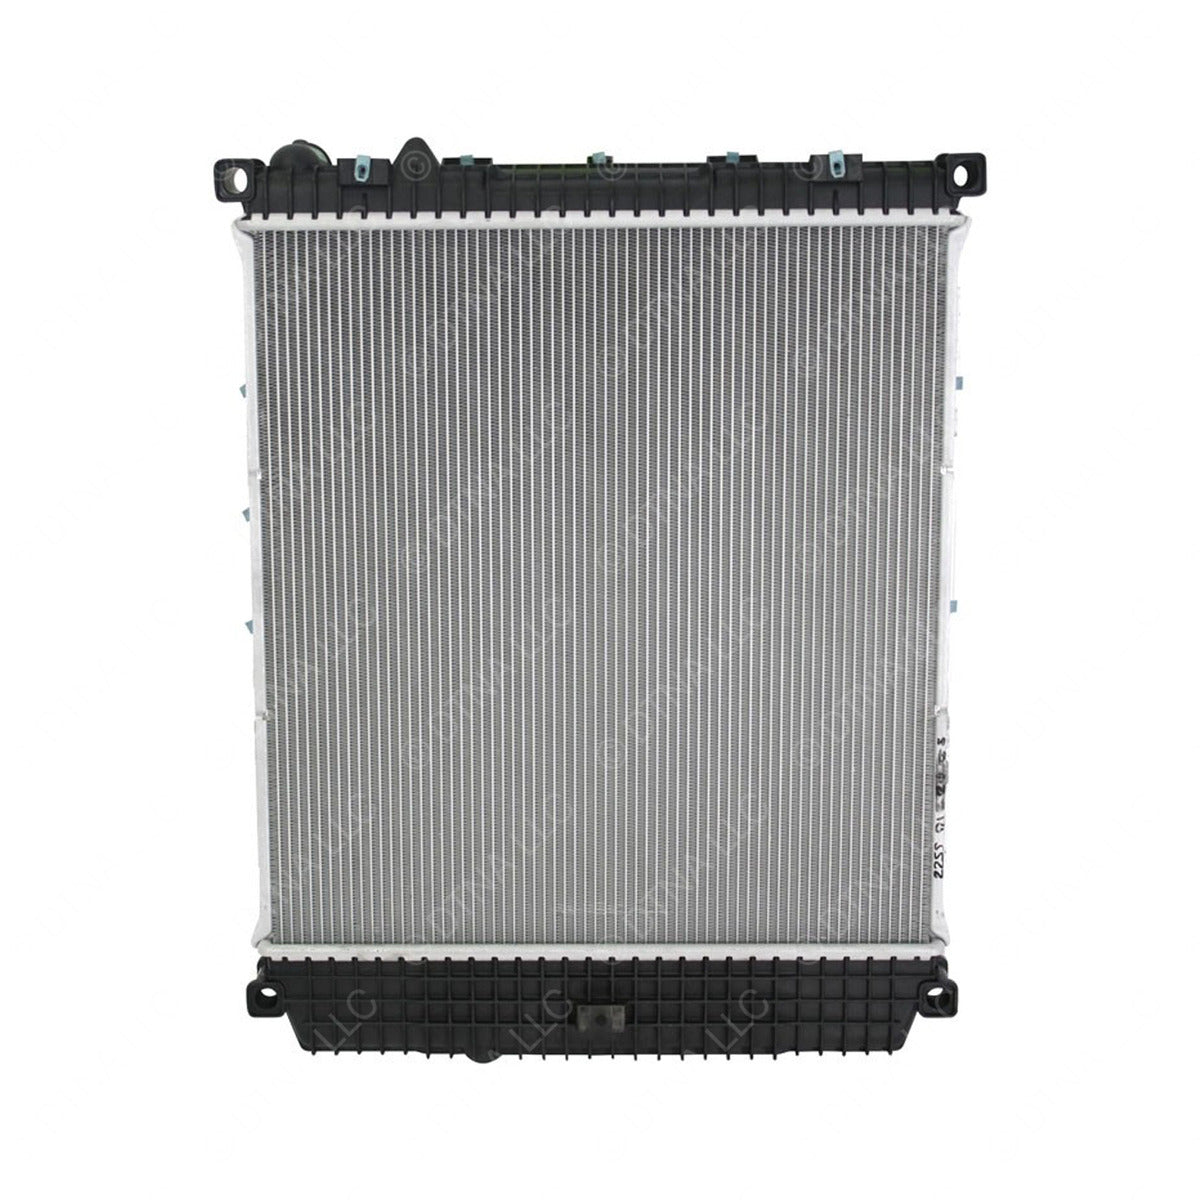 05-37217-039 - HOUSED RADIATOR ASSEMBLY